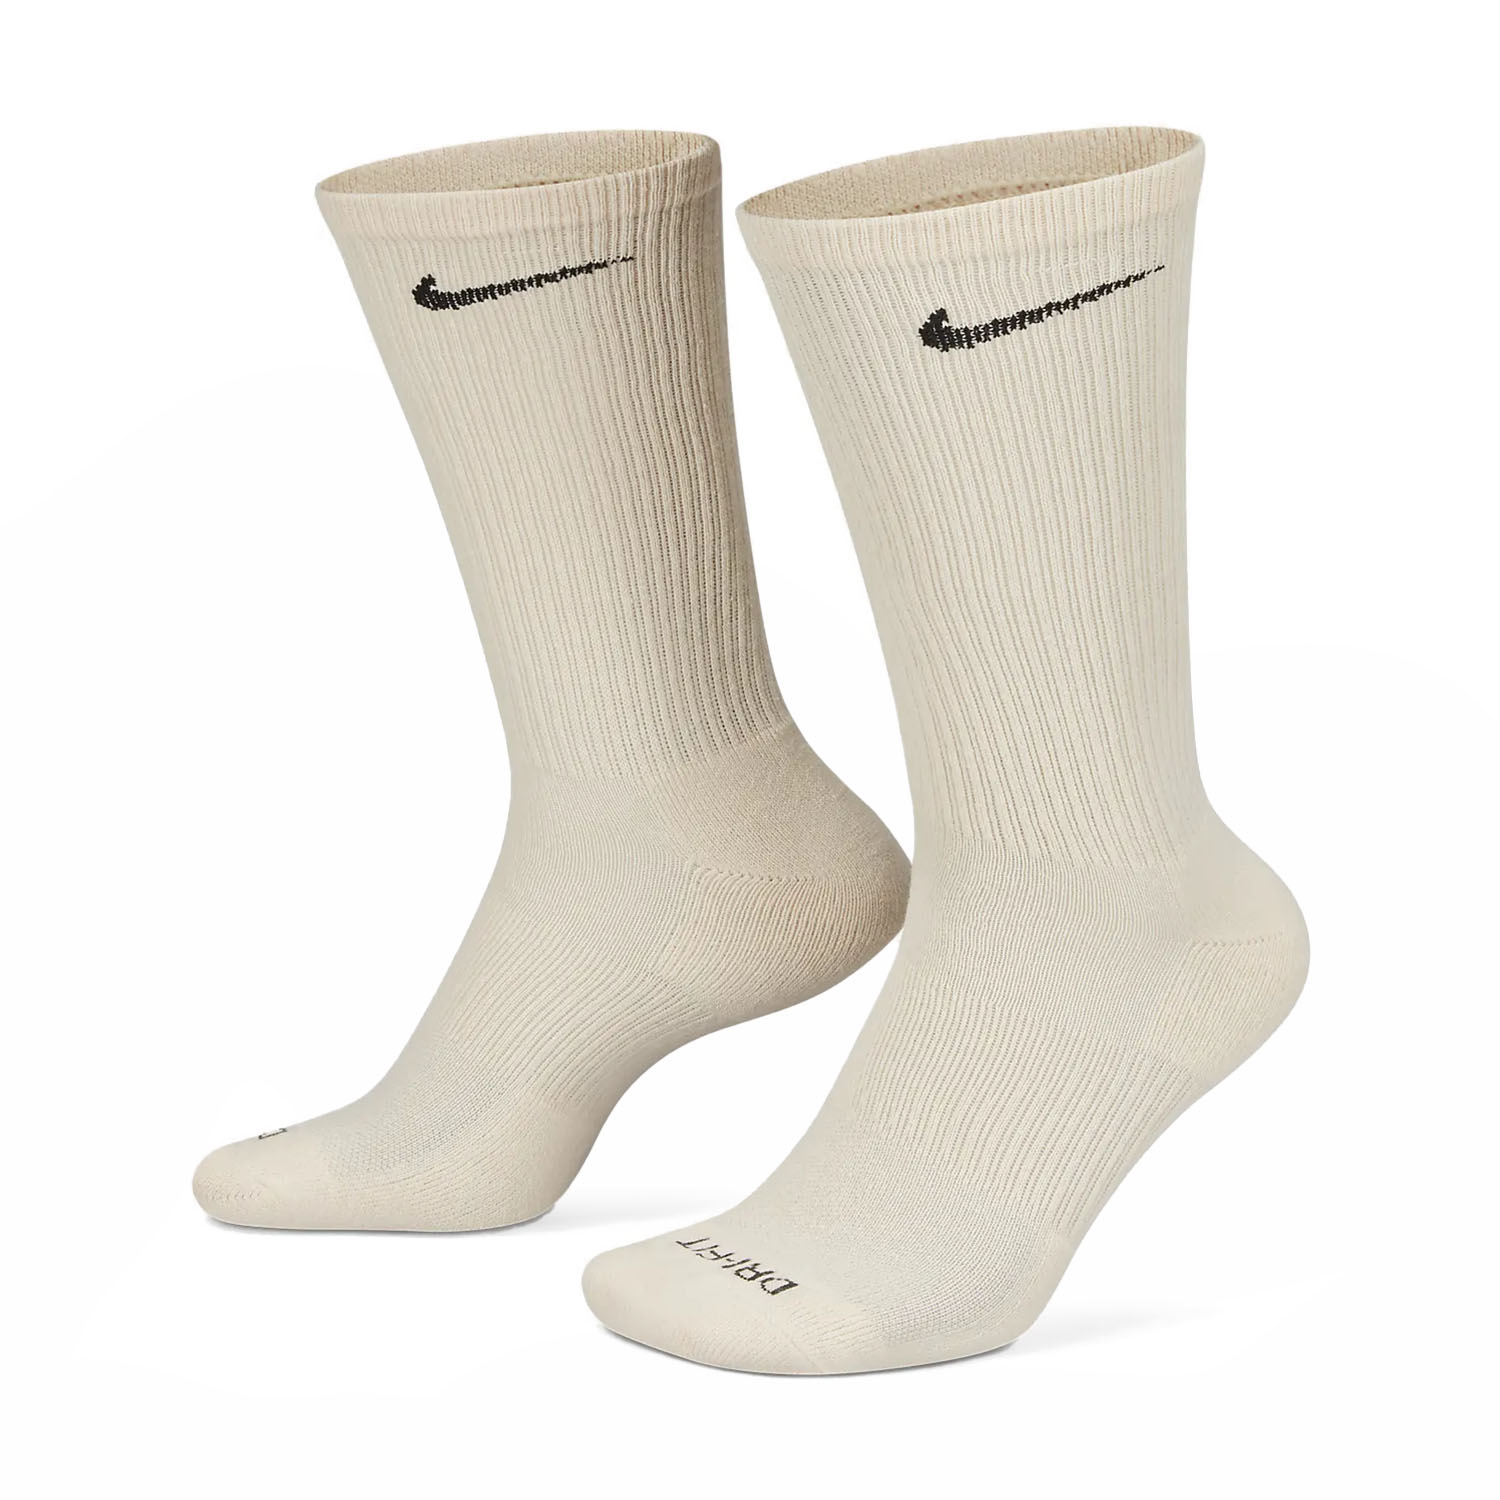 Nike Everyday Plus Cushioned x 6 Calcetines - Multi Color